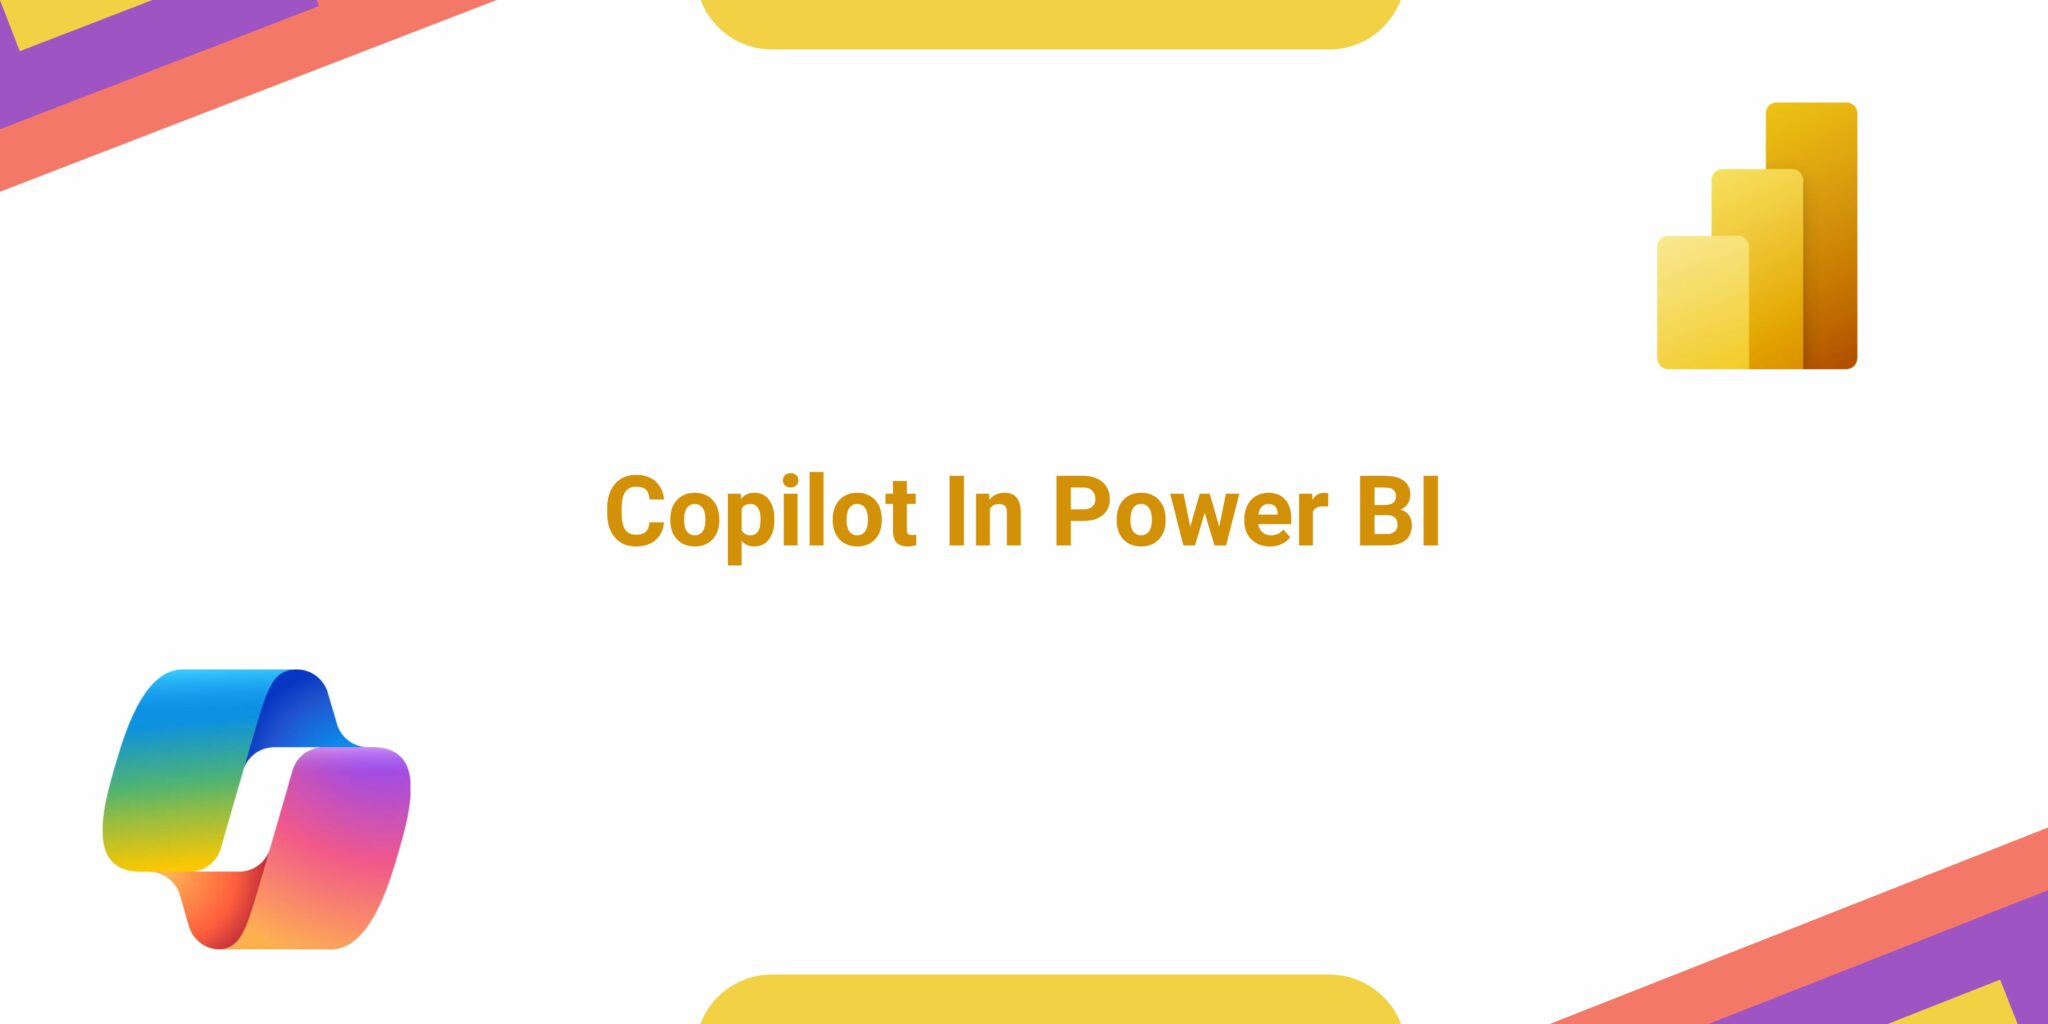 How To Use Copilot in Power BI